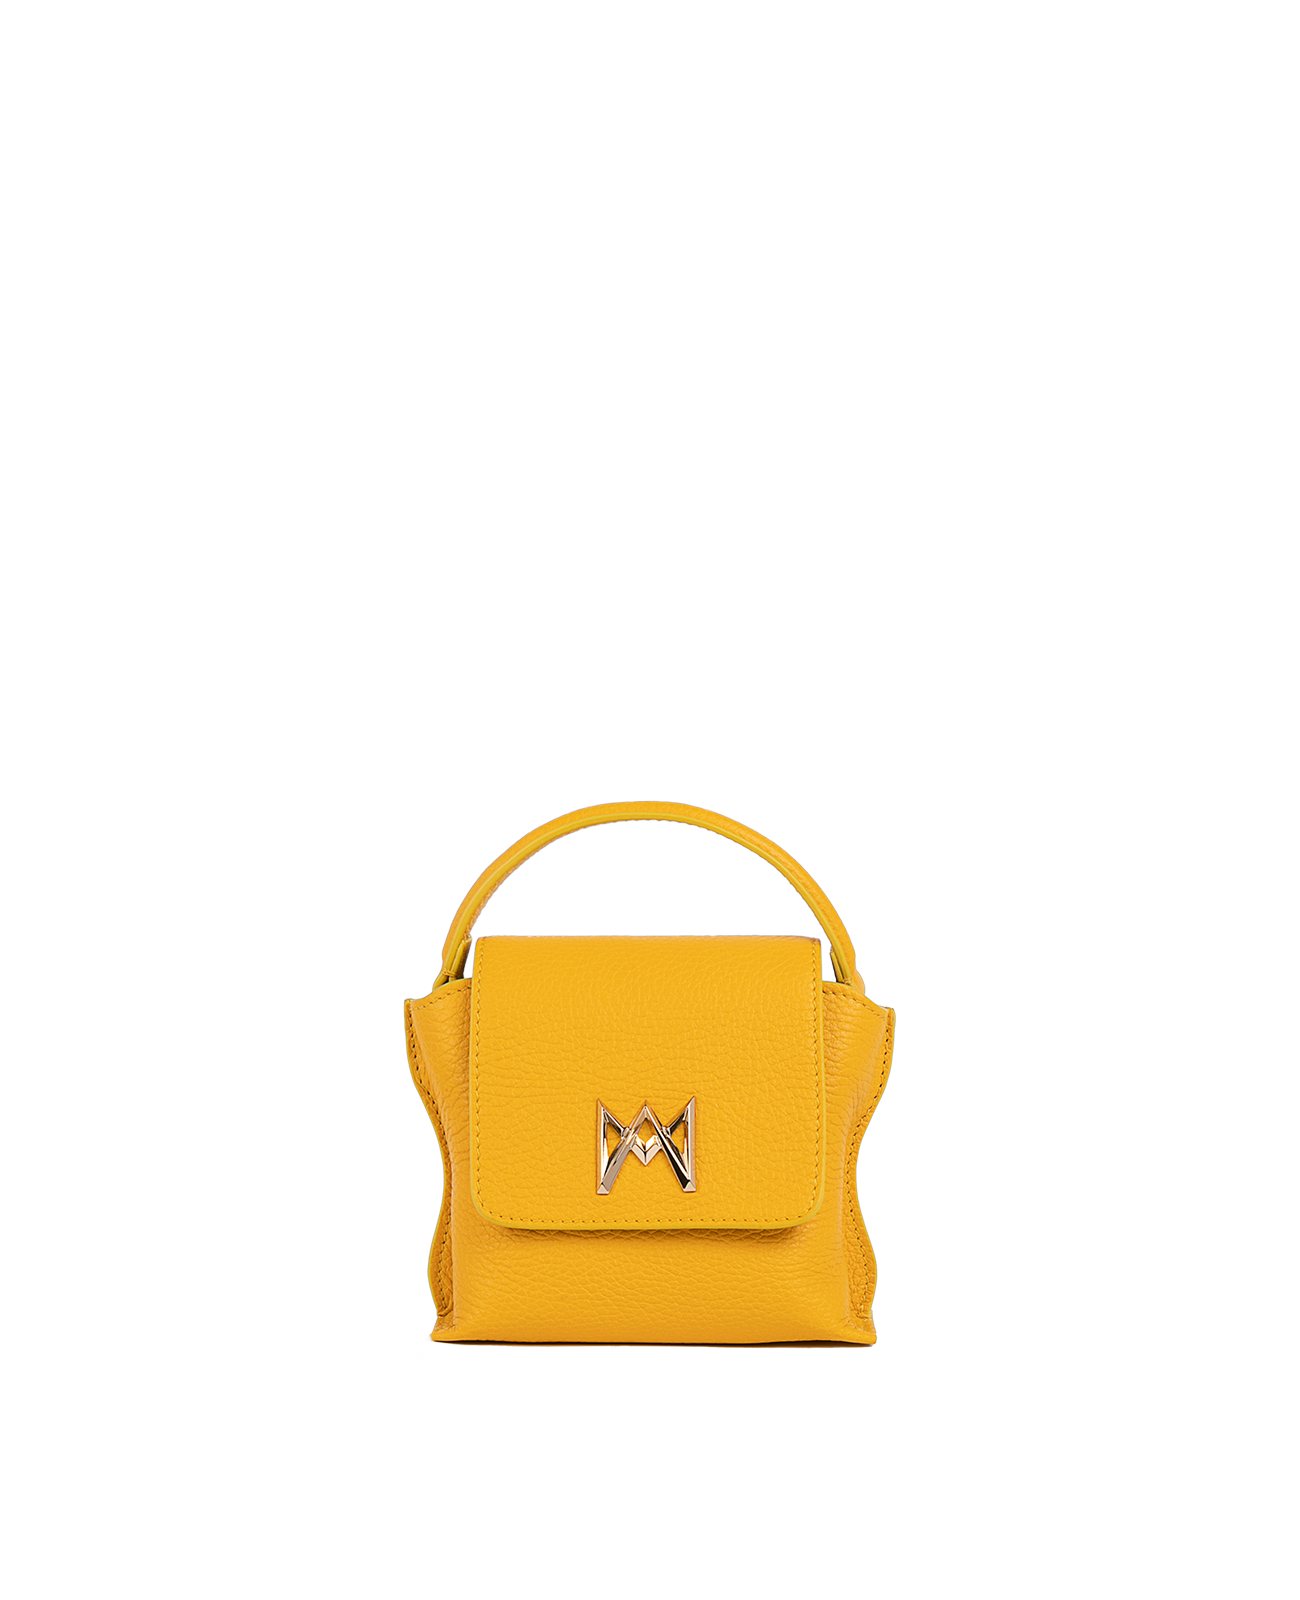 Cross-body bag in Italian full-grain leather, semi-aniline calf Italian leather with detachable shoulder strap.Three compartments, zip pocket in the back compartment. Magnetic flap closure with logo. Color: Yellow. Size:Mini